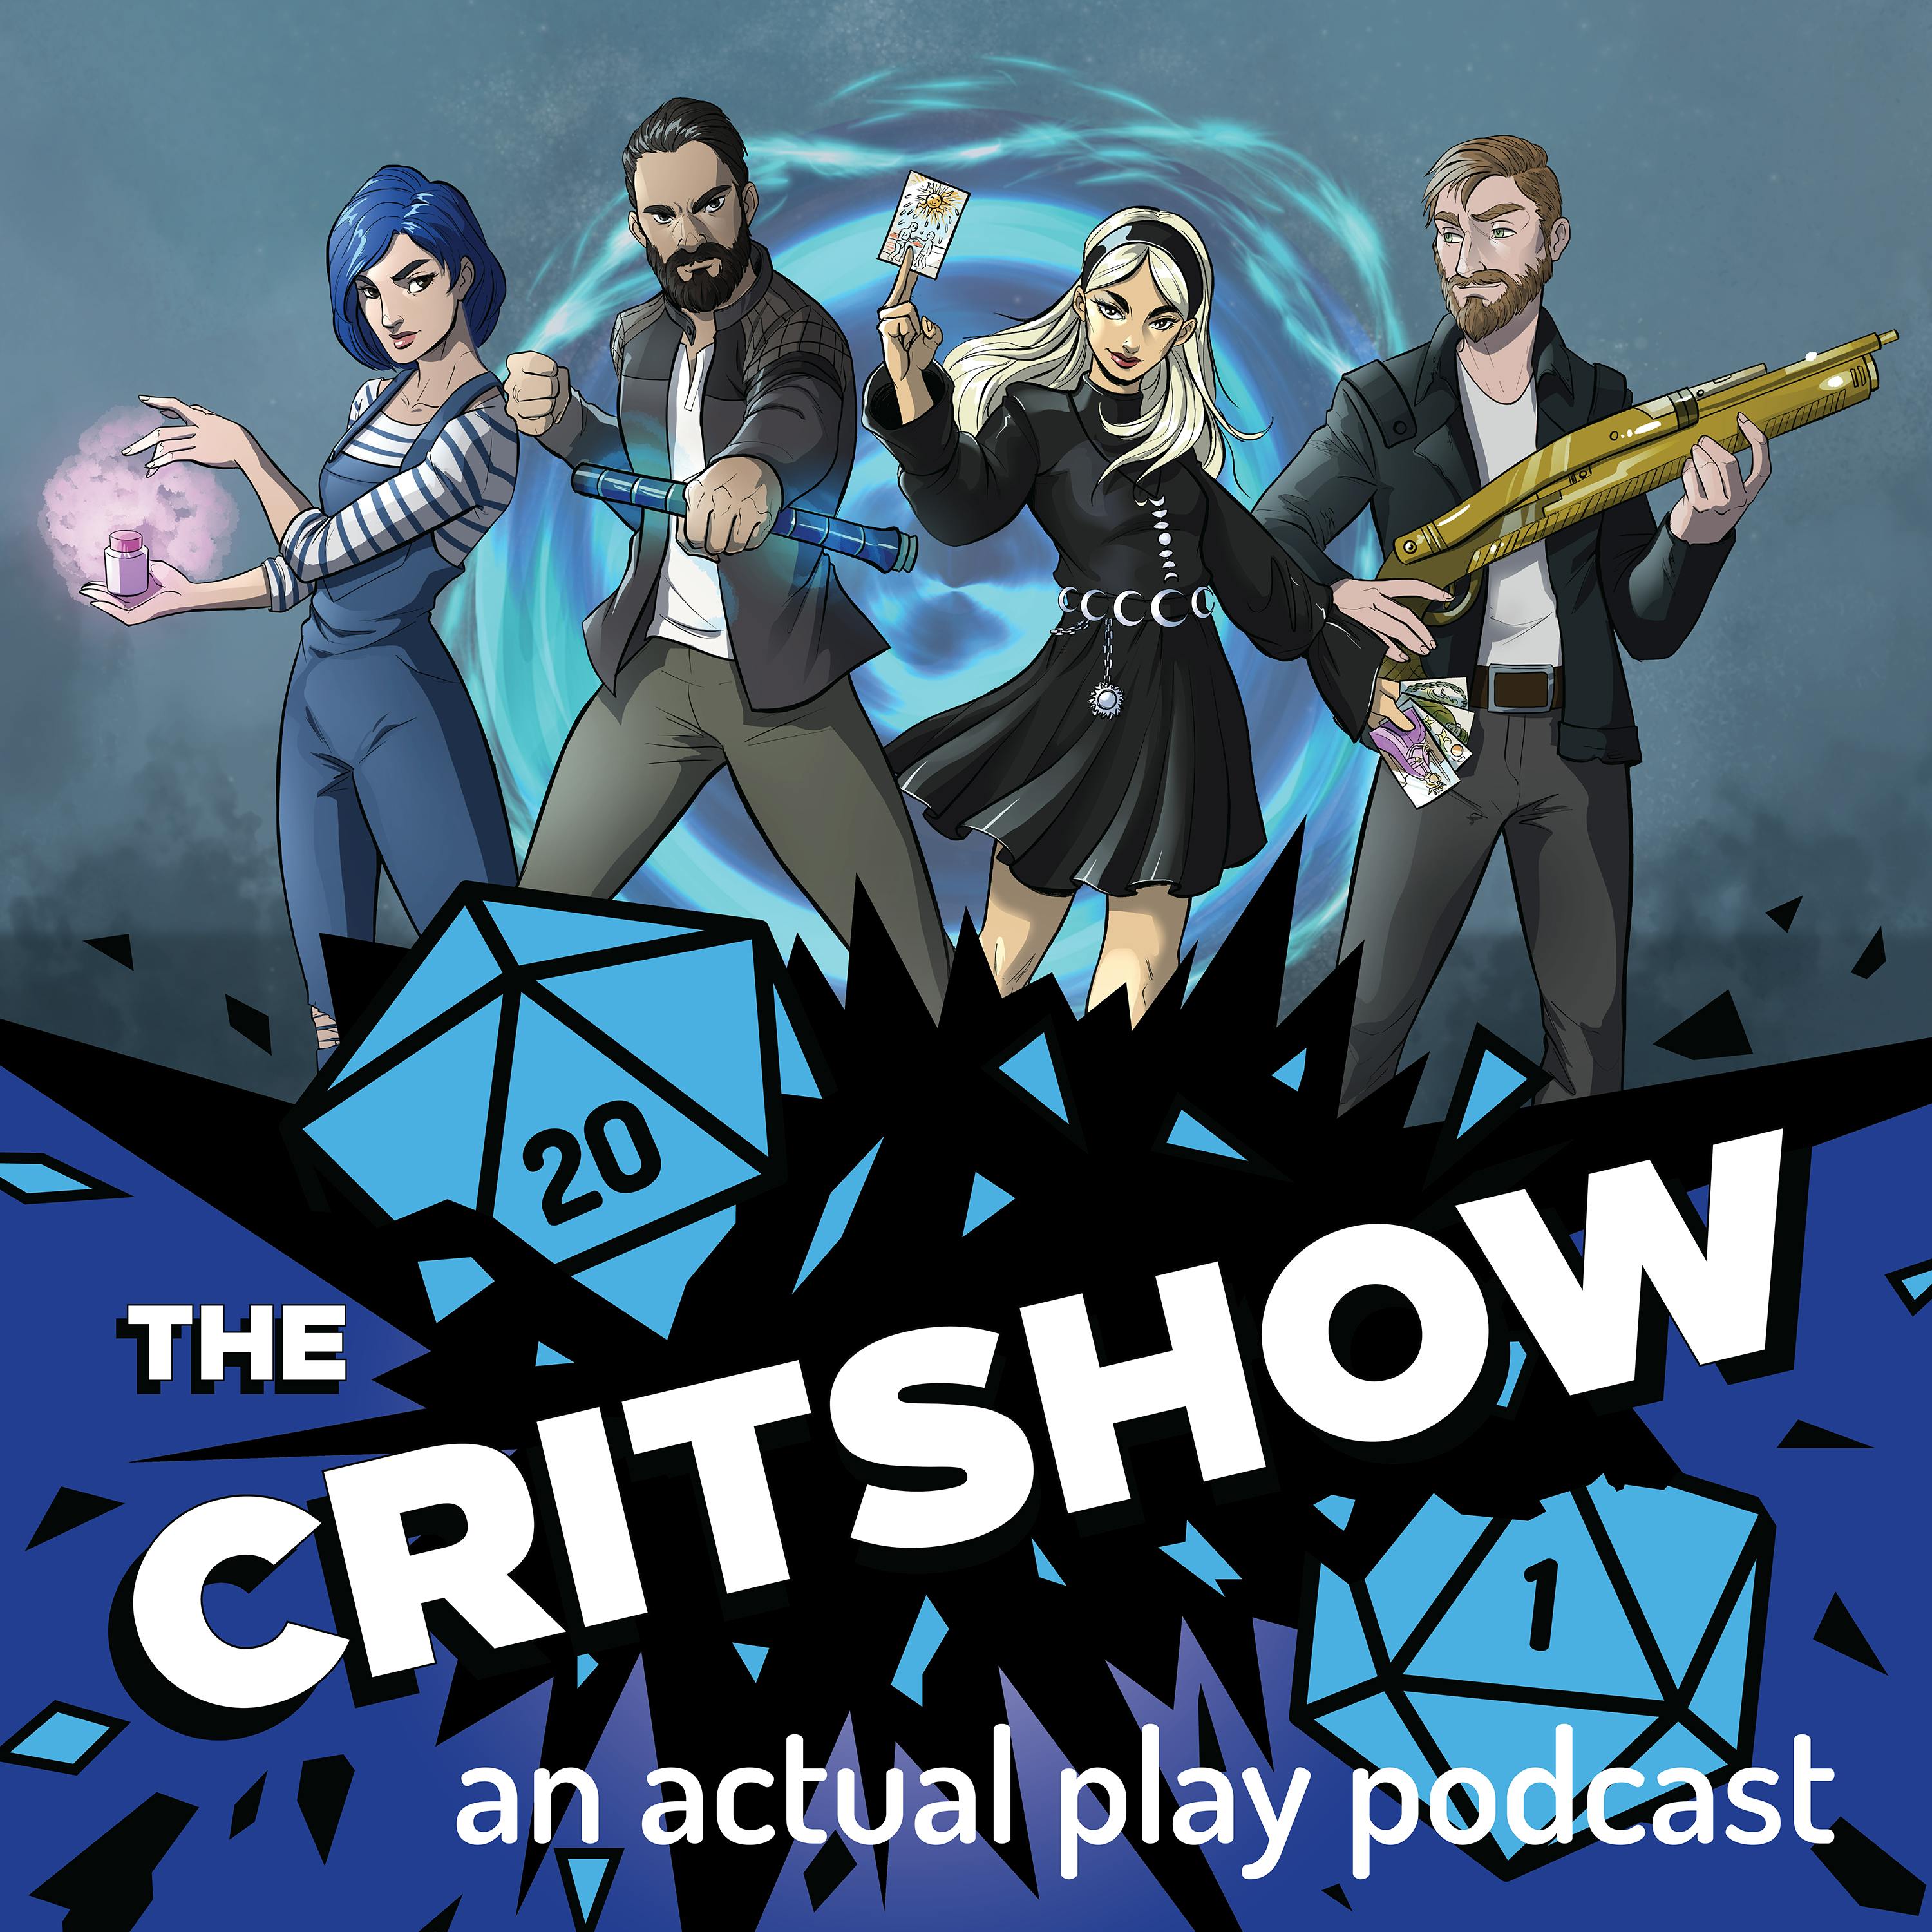 The Critshow